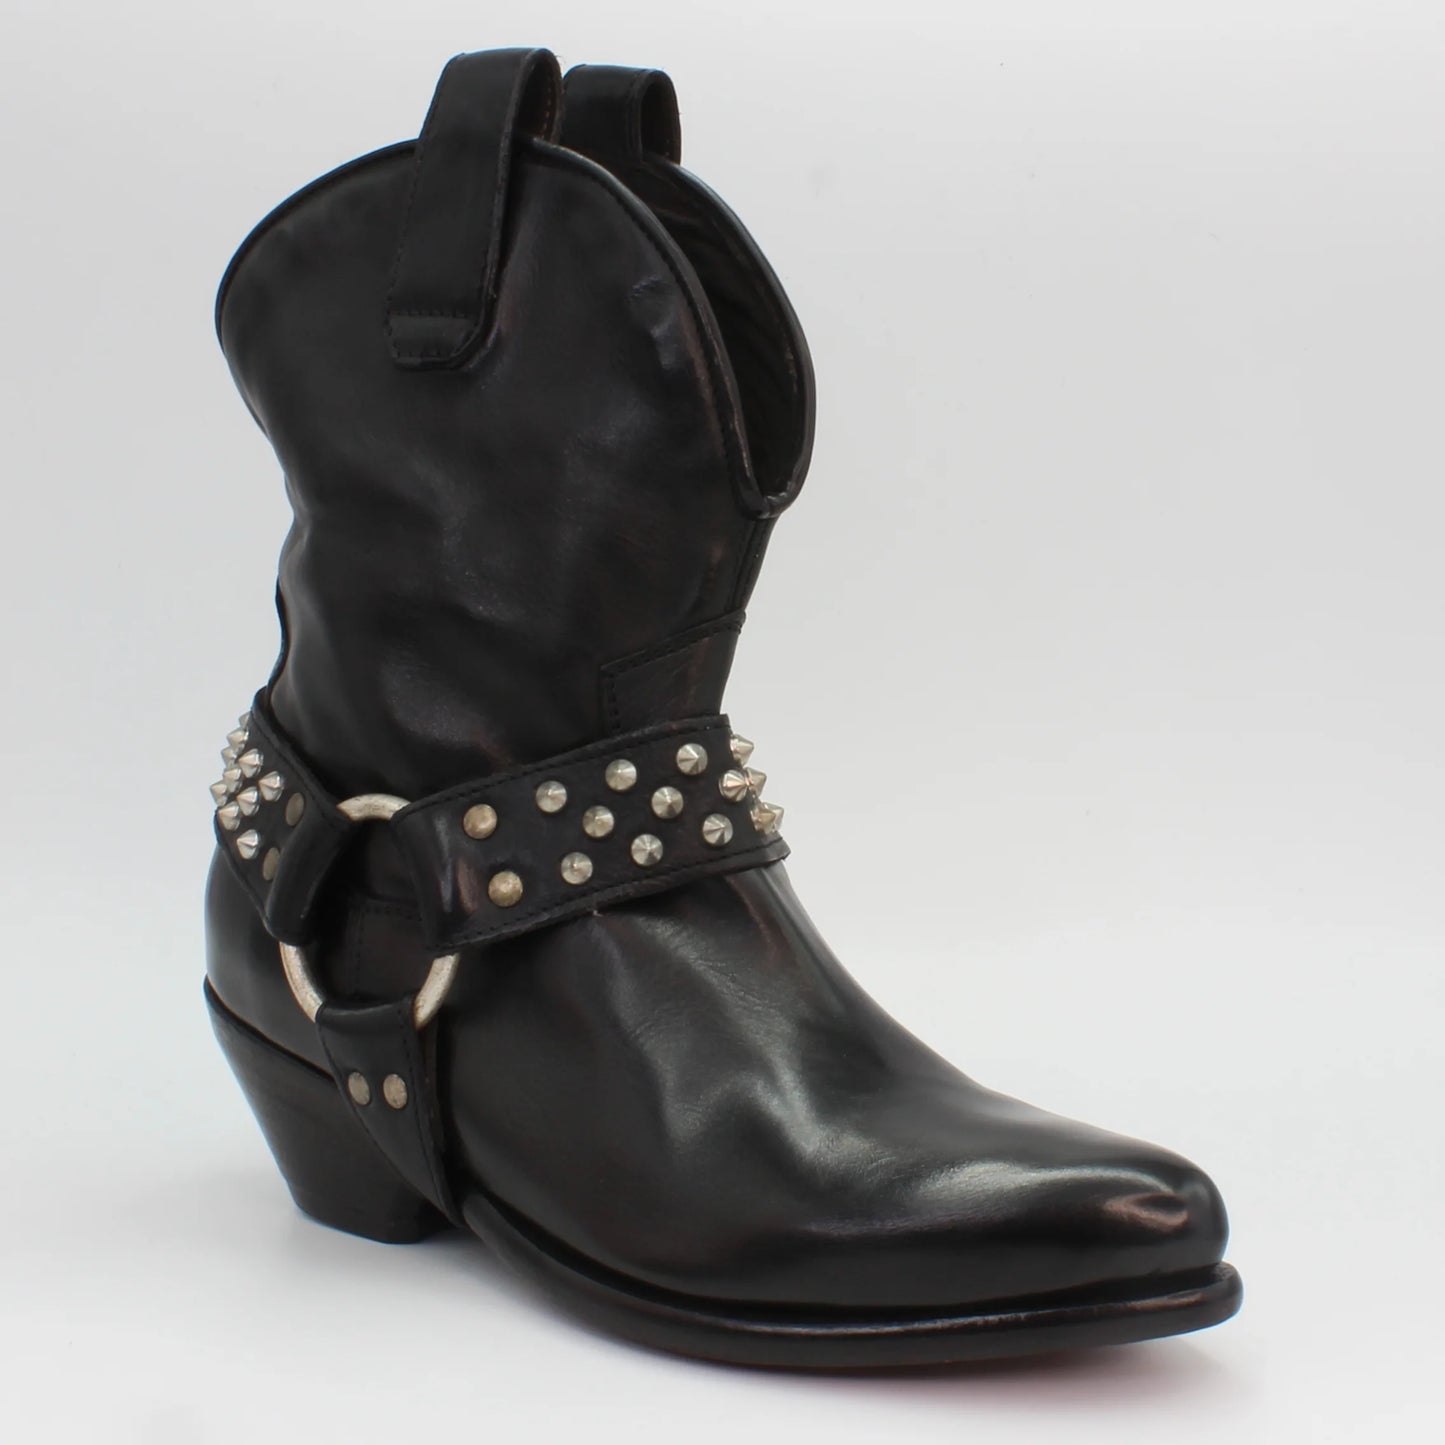 Ladies genuine leather Italian low western boot with studs in black made in Italy exclusively for Aliverti